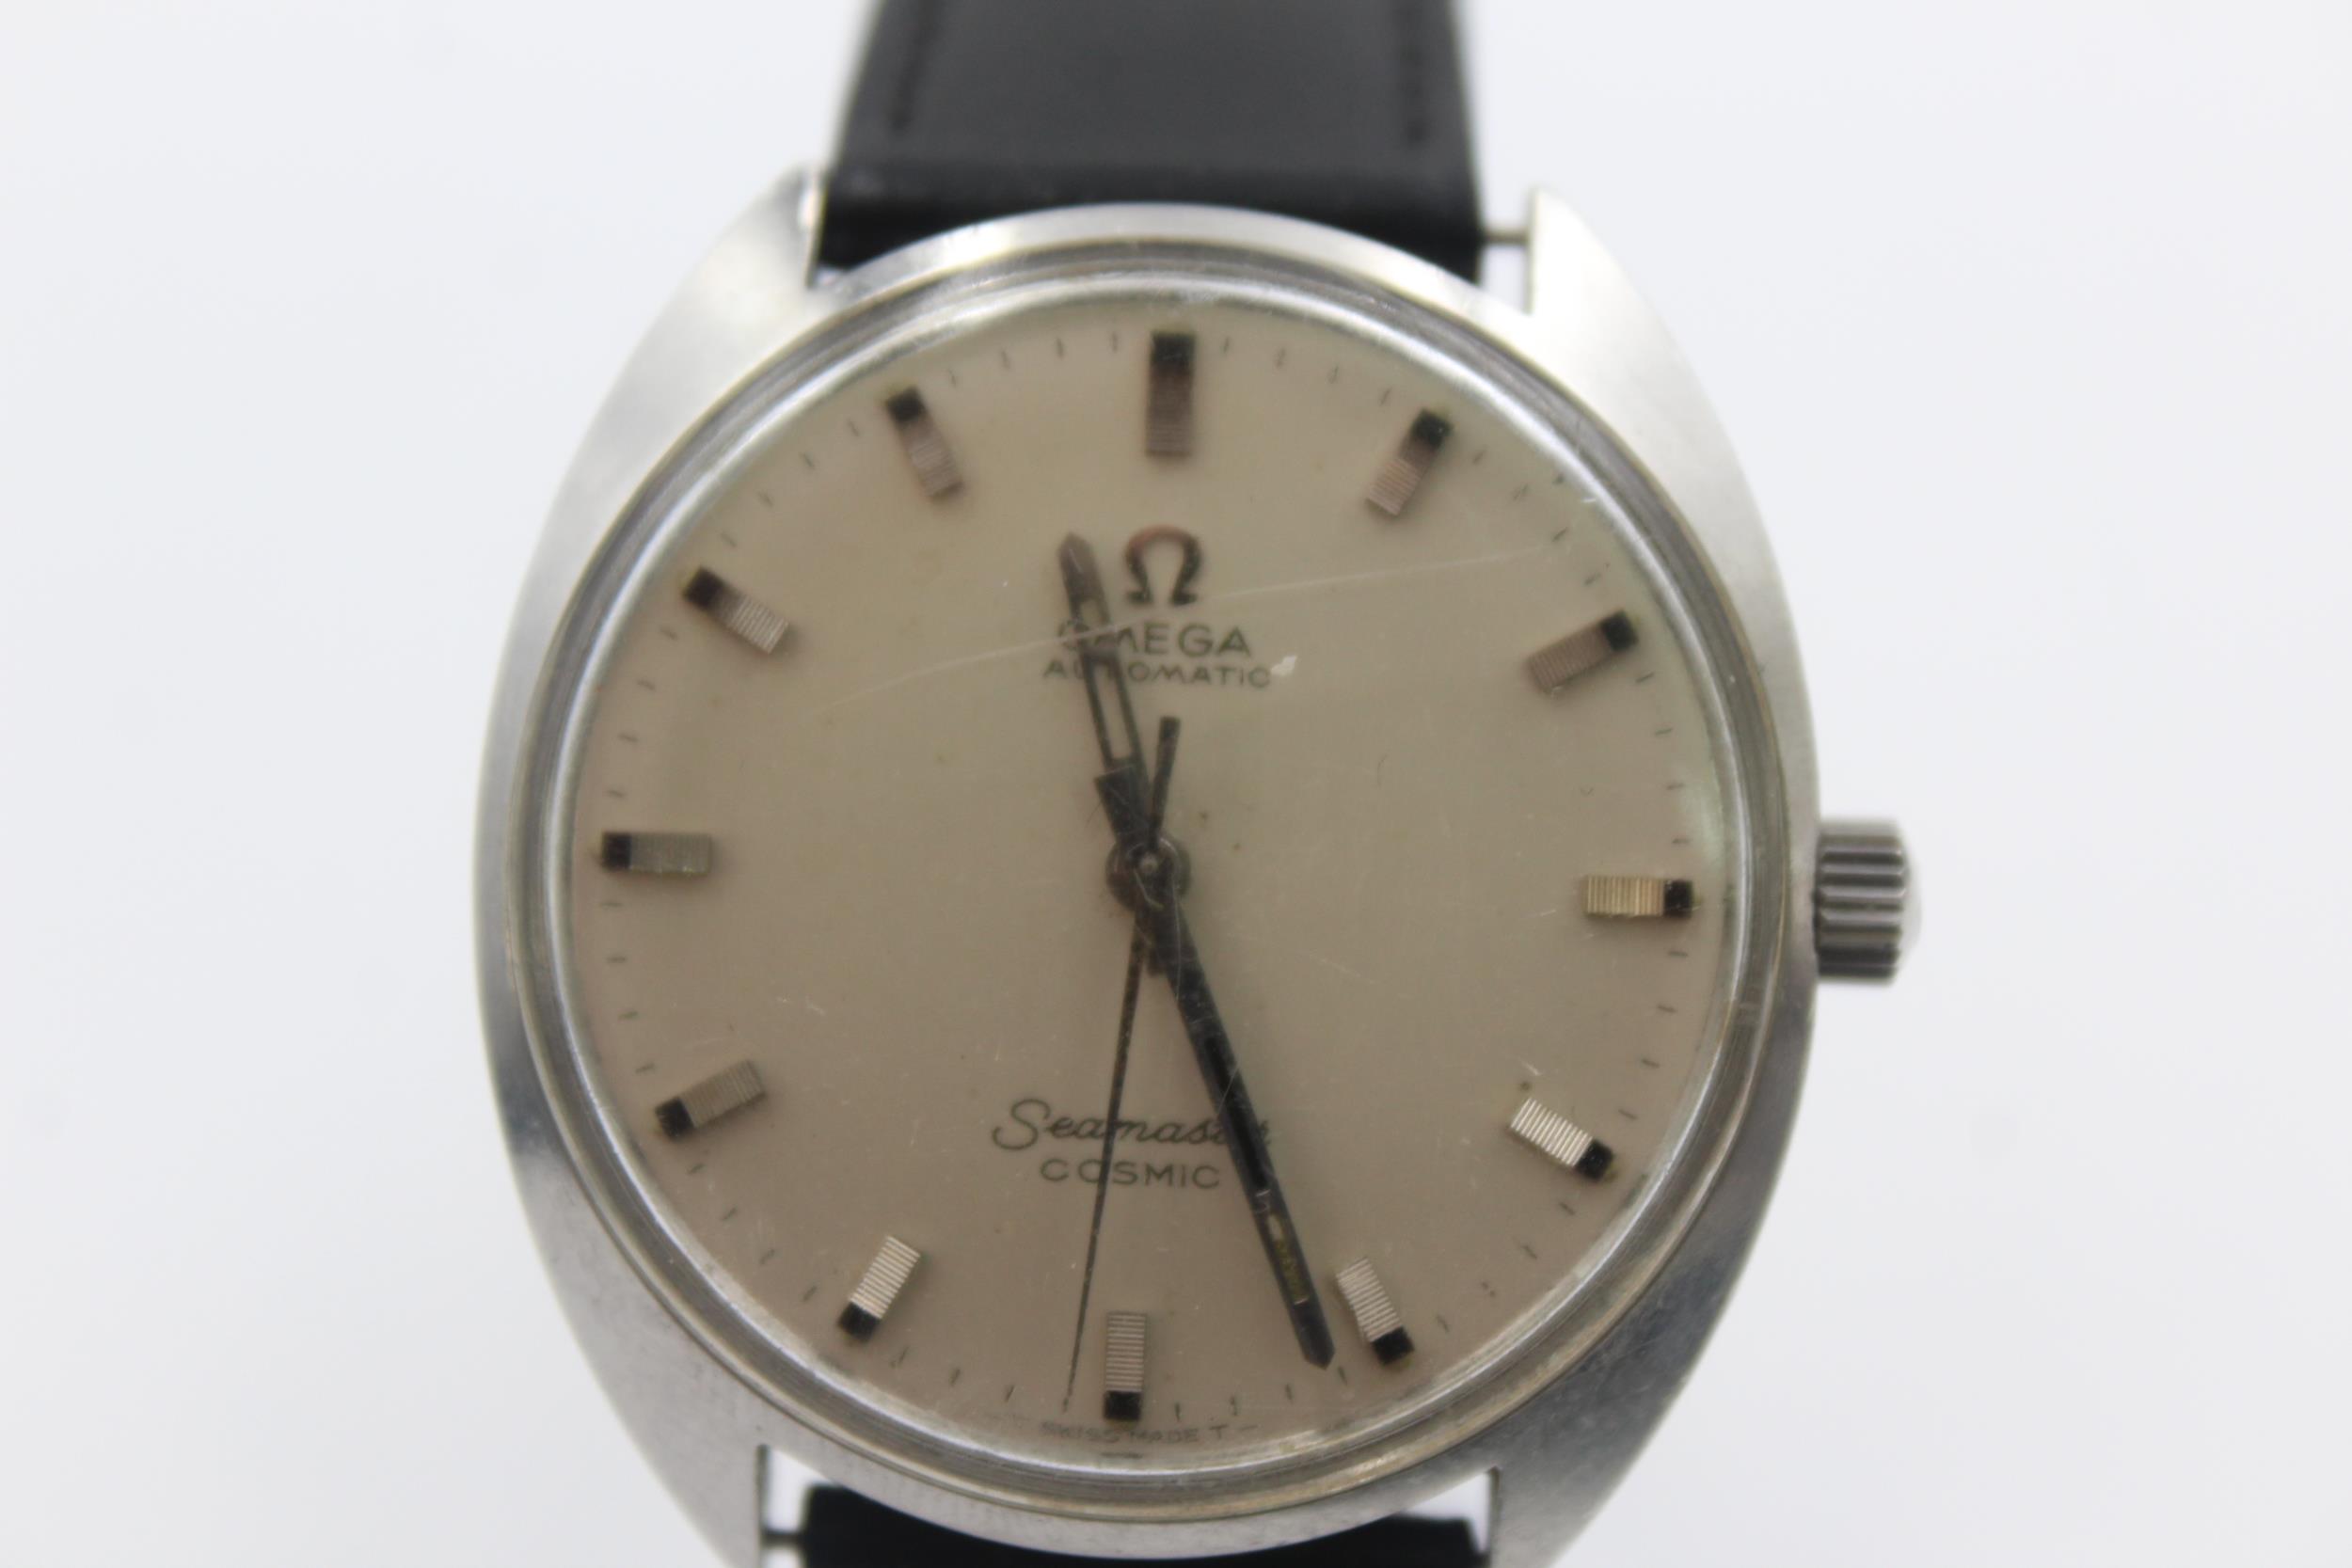 Vintage Gents OMEGA Seamaster Cosmic Wristwatch Hand wind WORKING Ref 165026 - Image 2 of 5